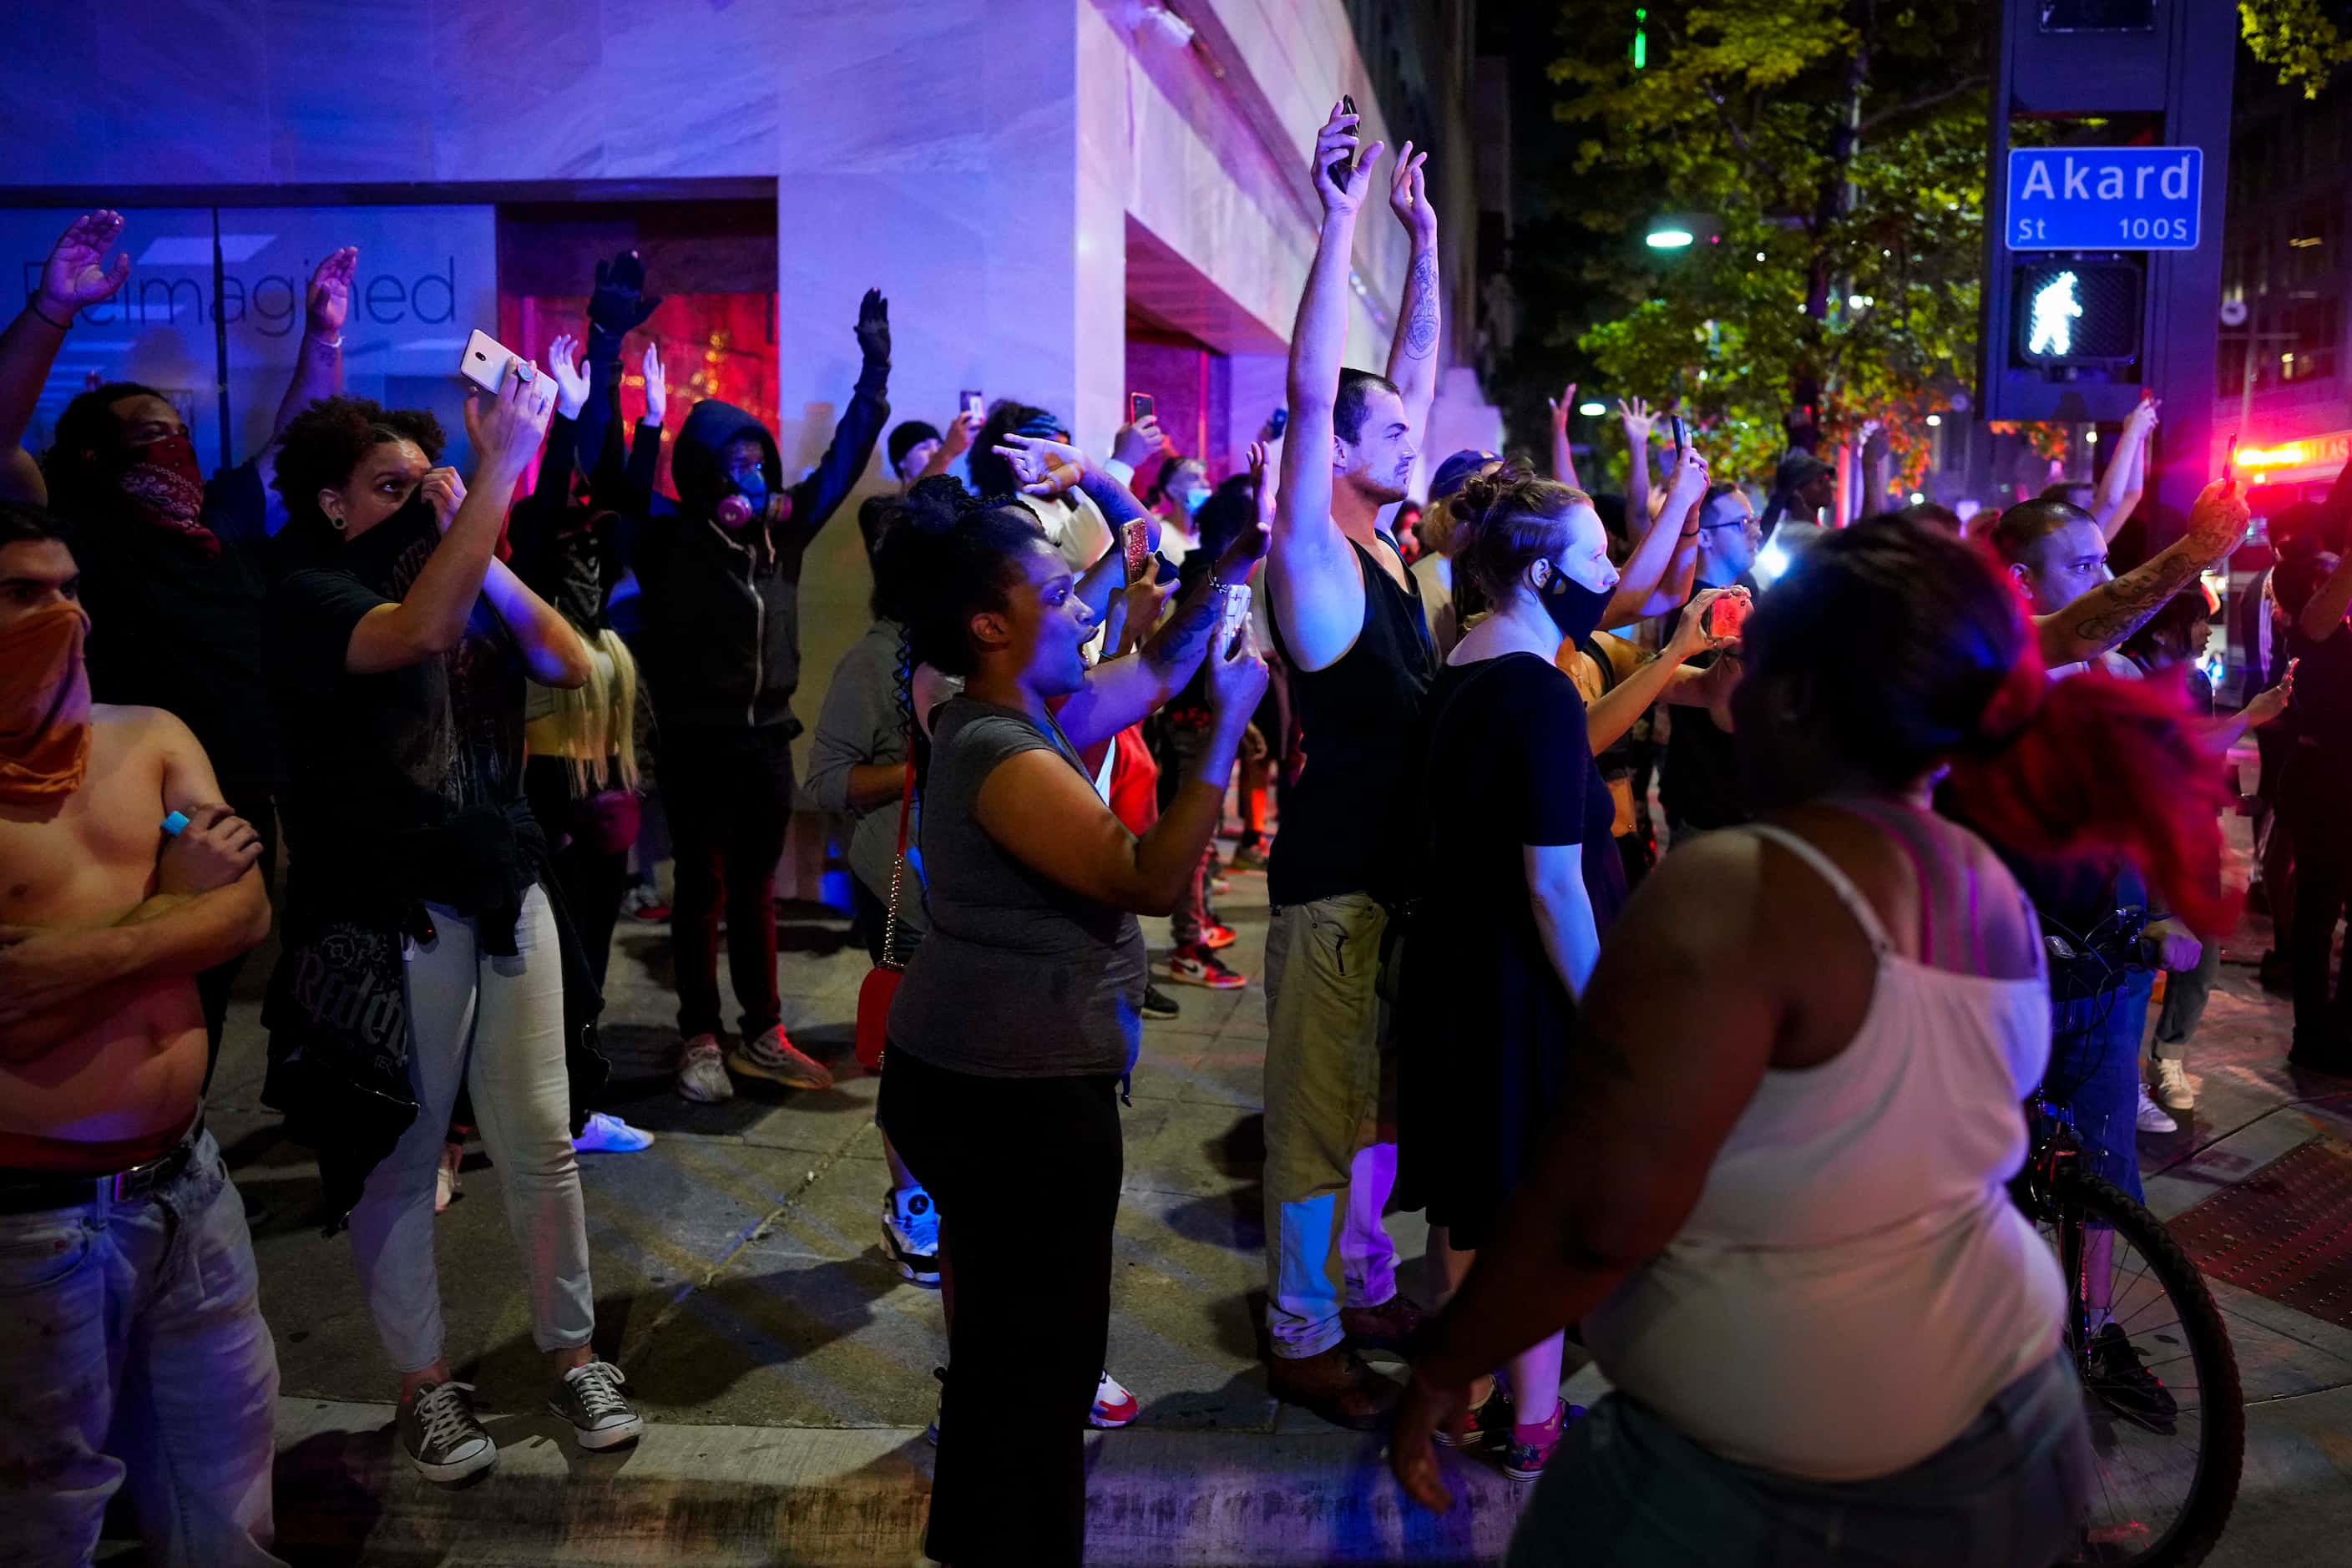 A group of people raise their hands at the corner of Akard and Main Streets downtown after...